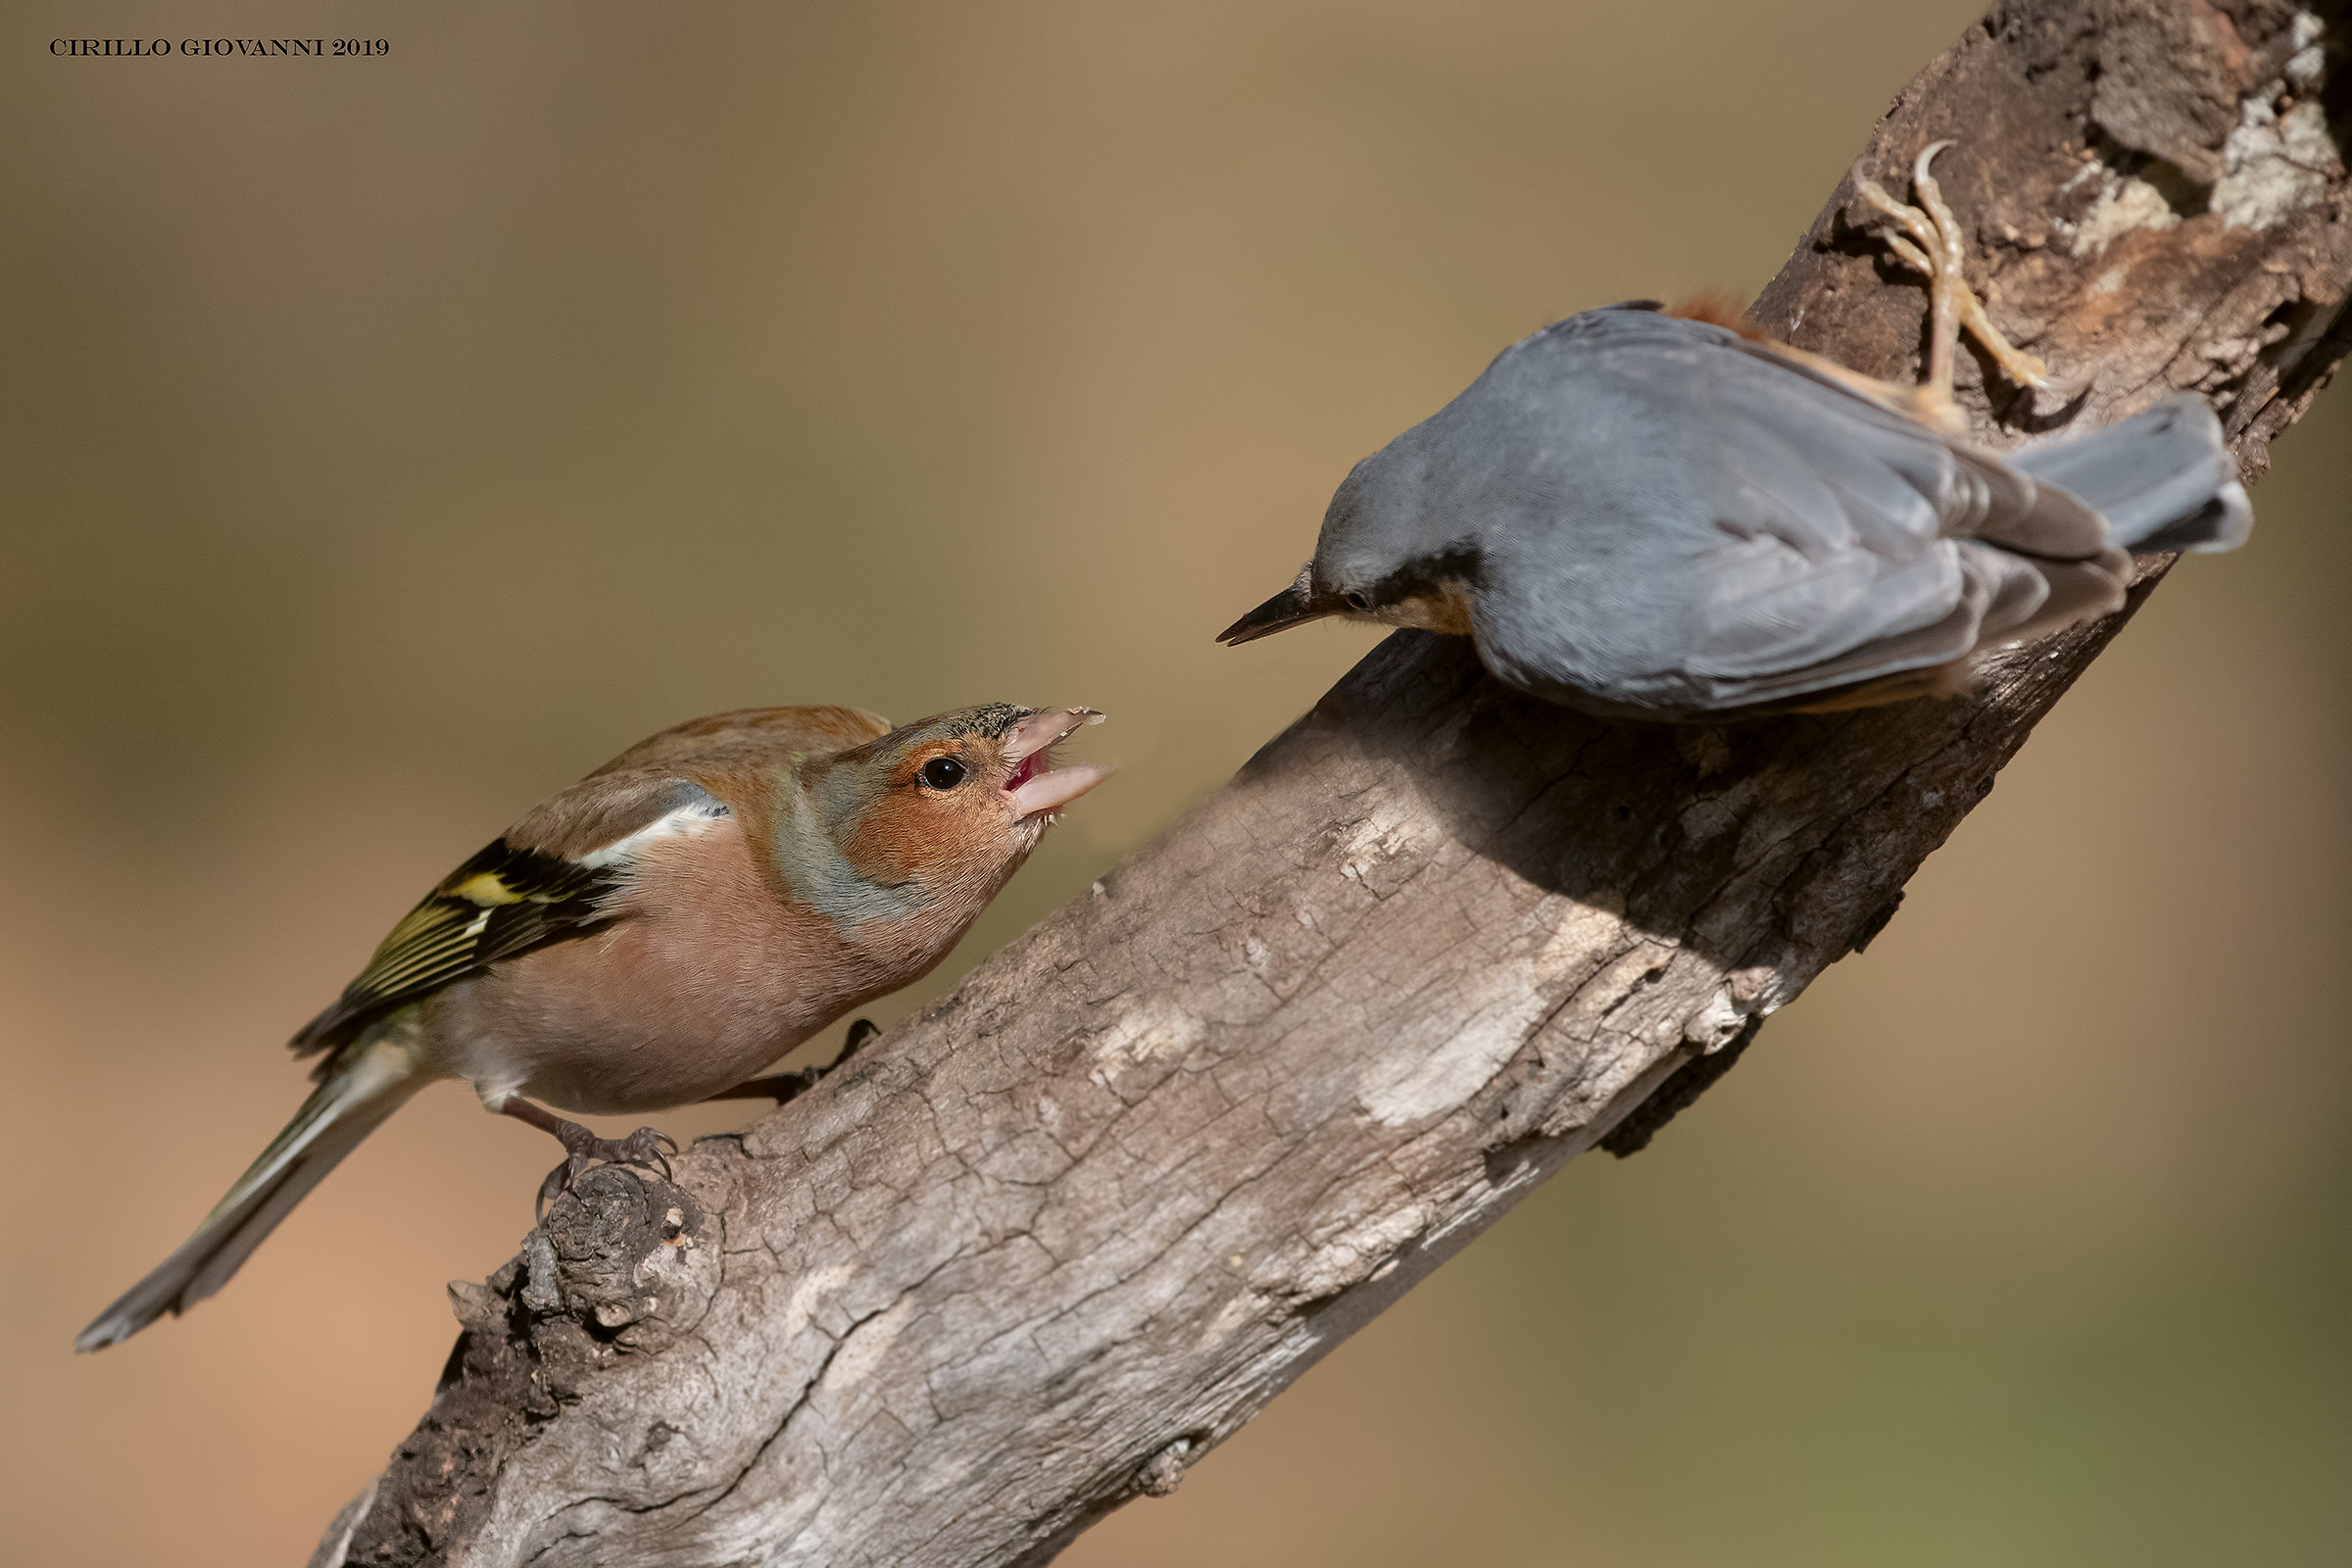 Skirmishes between finches and Nuthatch ...